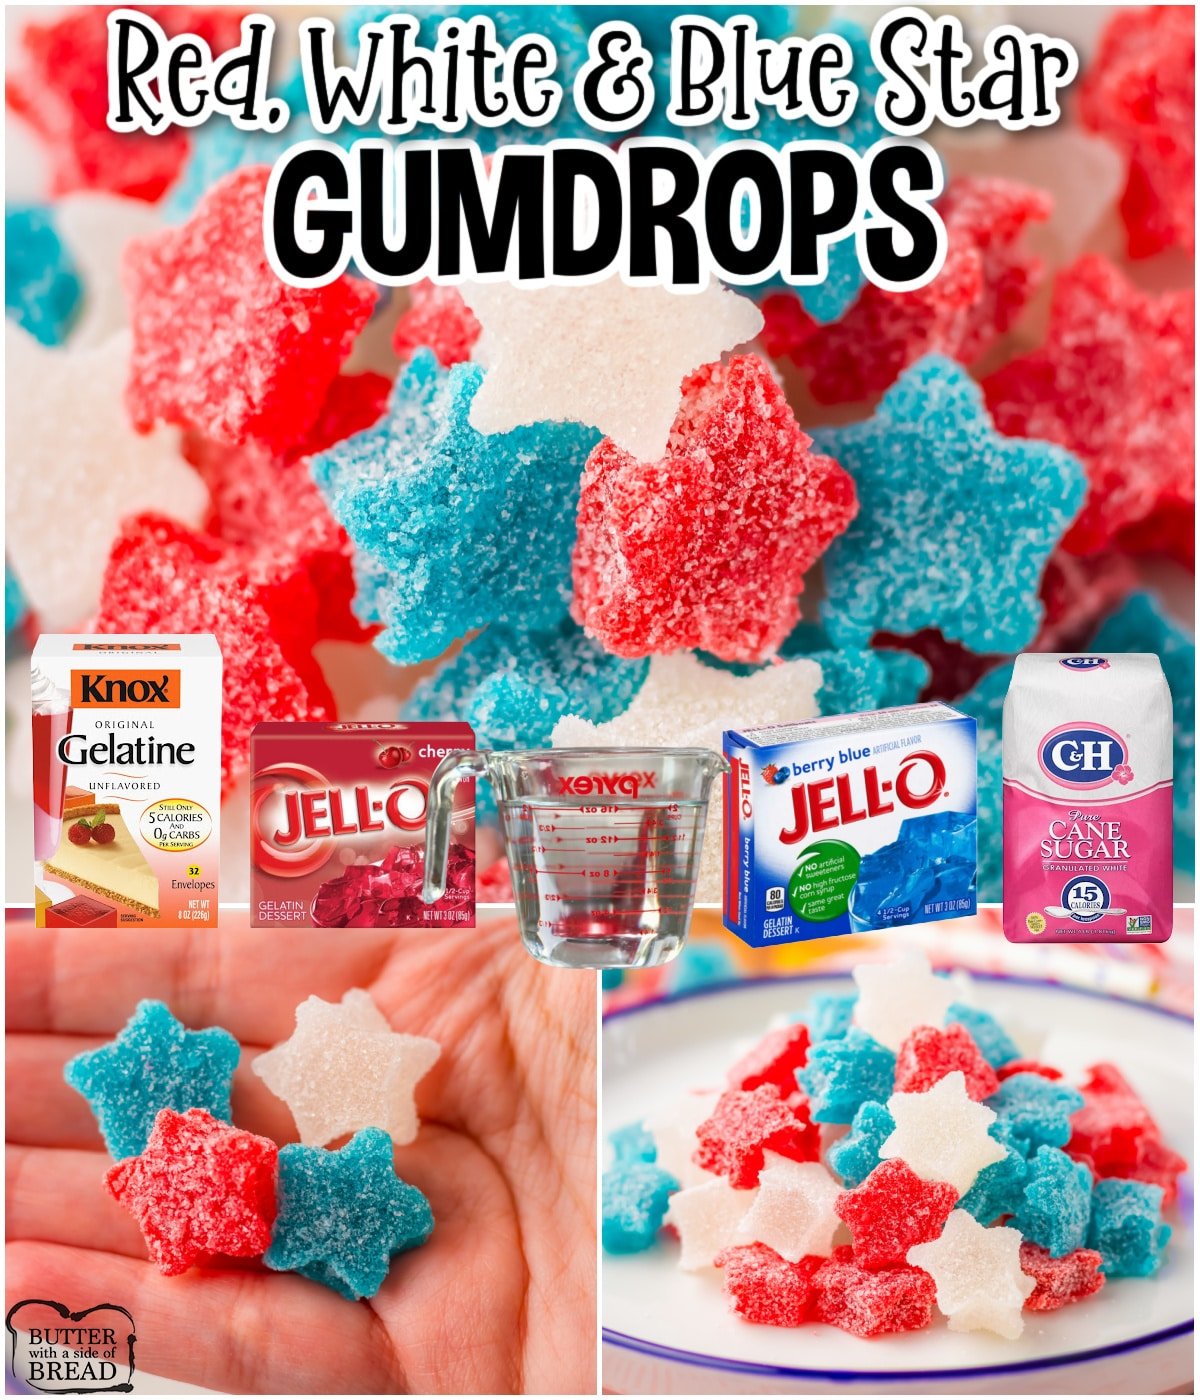 Red White & Blue Gumdrops are easy candies made with Jello, sugar & applesauce! They're a festive & delicious 4th of July dessert!